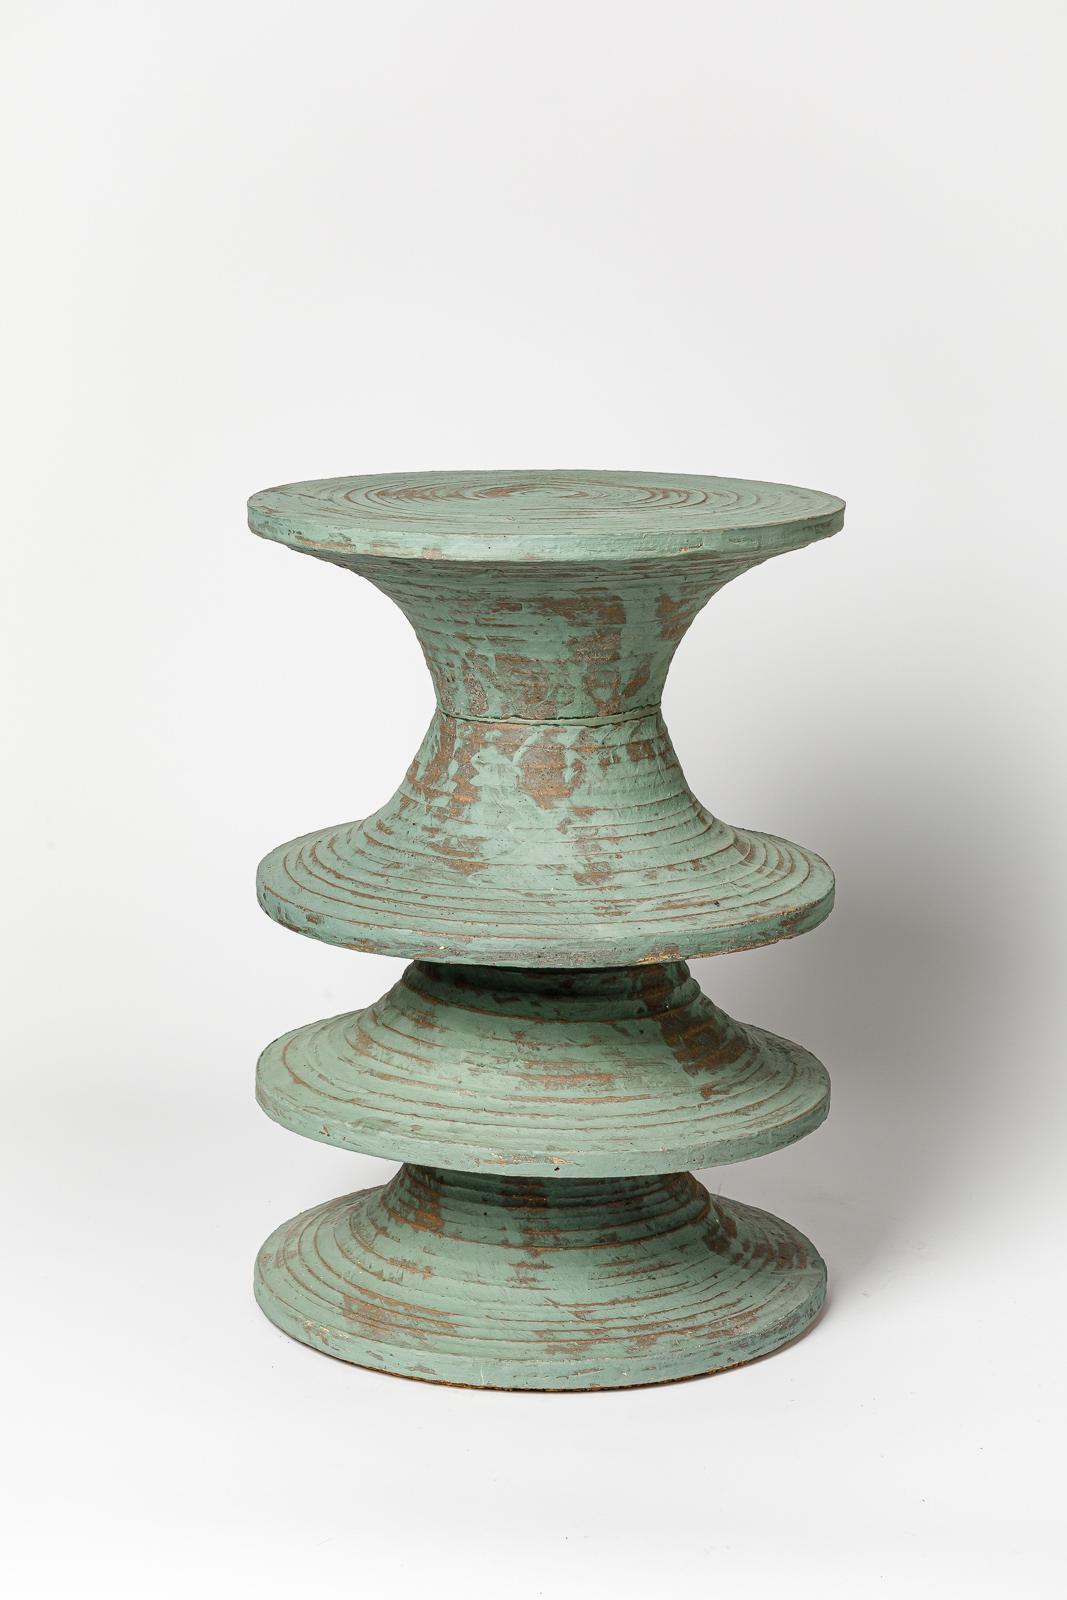 Green engobed stoneware stool by Mart Schrijvers.
Artist monogram at the base. 2023.
H : 18’ x 12.6’ inches.